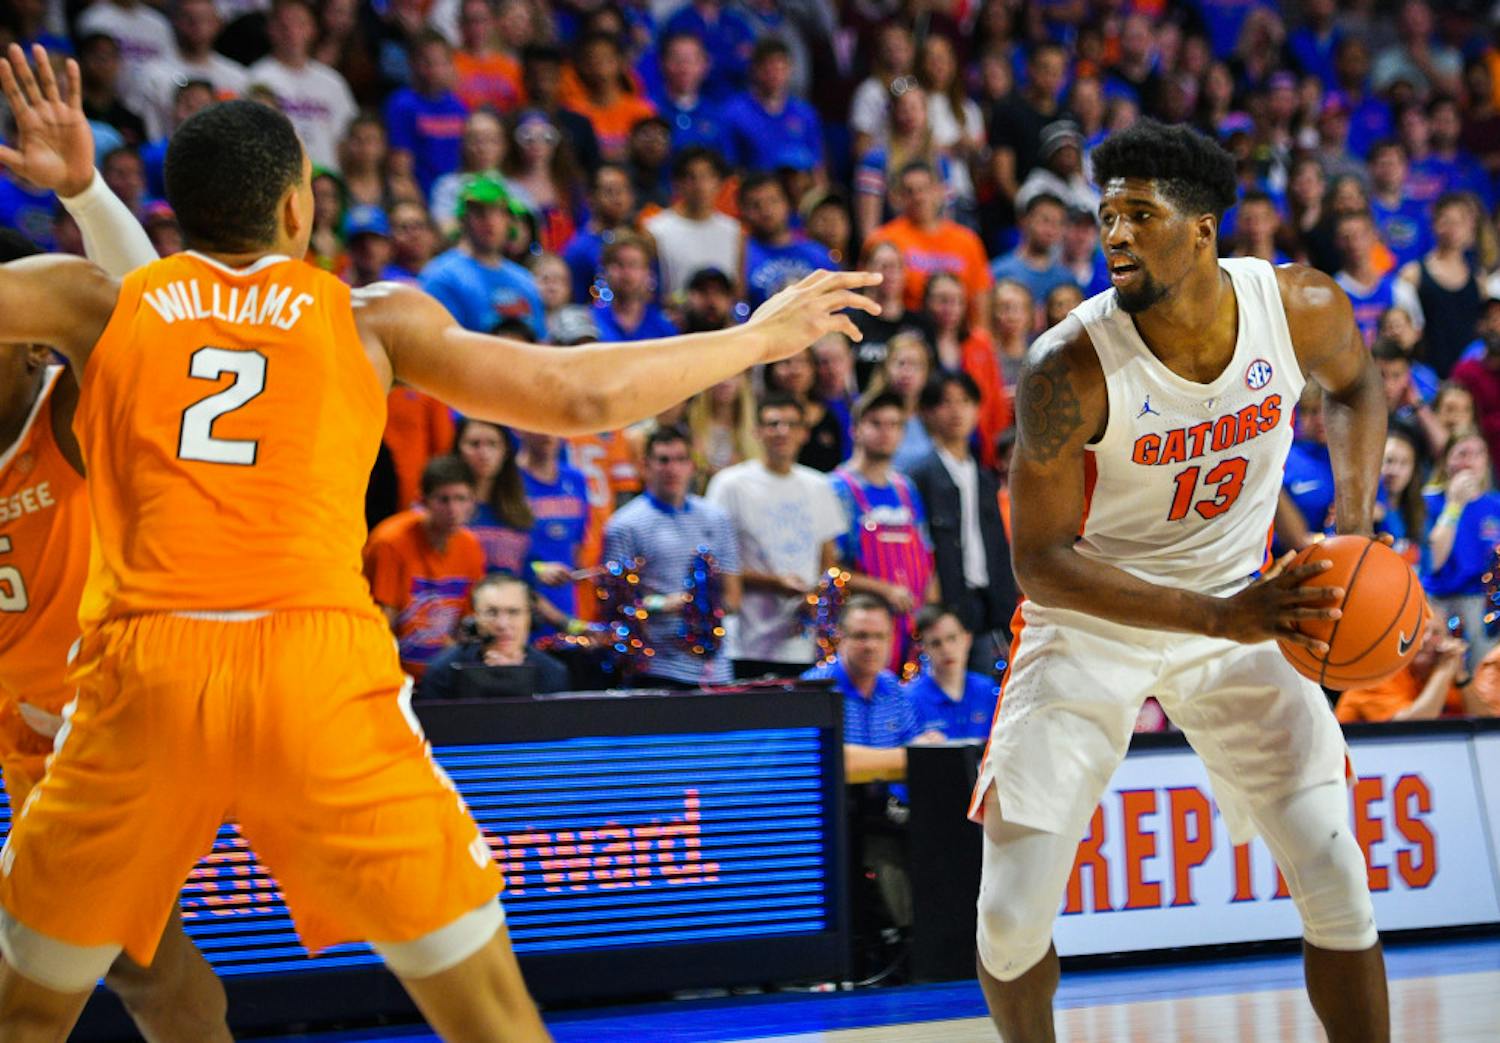 Florida center Kevarrius Hayes scored 11 points on 3-of-4 shooting on Tuesday against Auburn. 